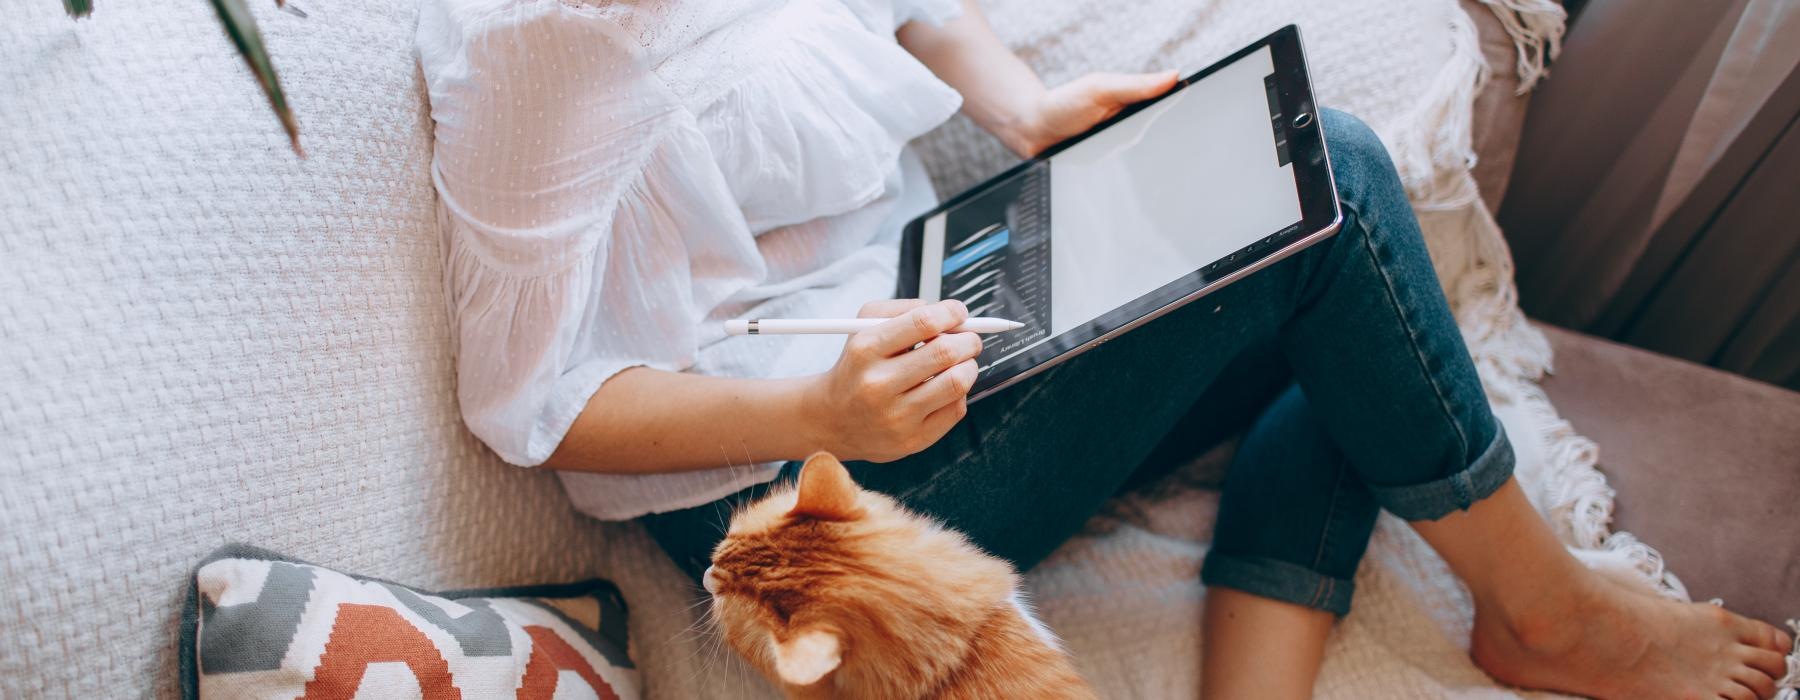 woman using a laptop on a couch next to  a cat